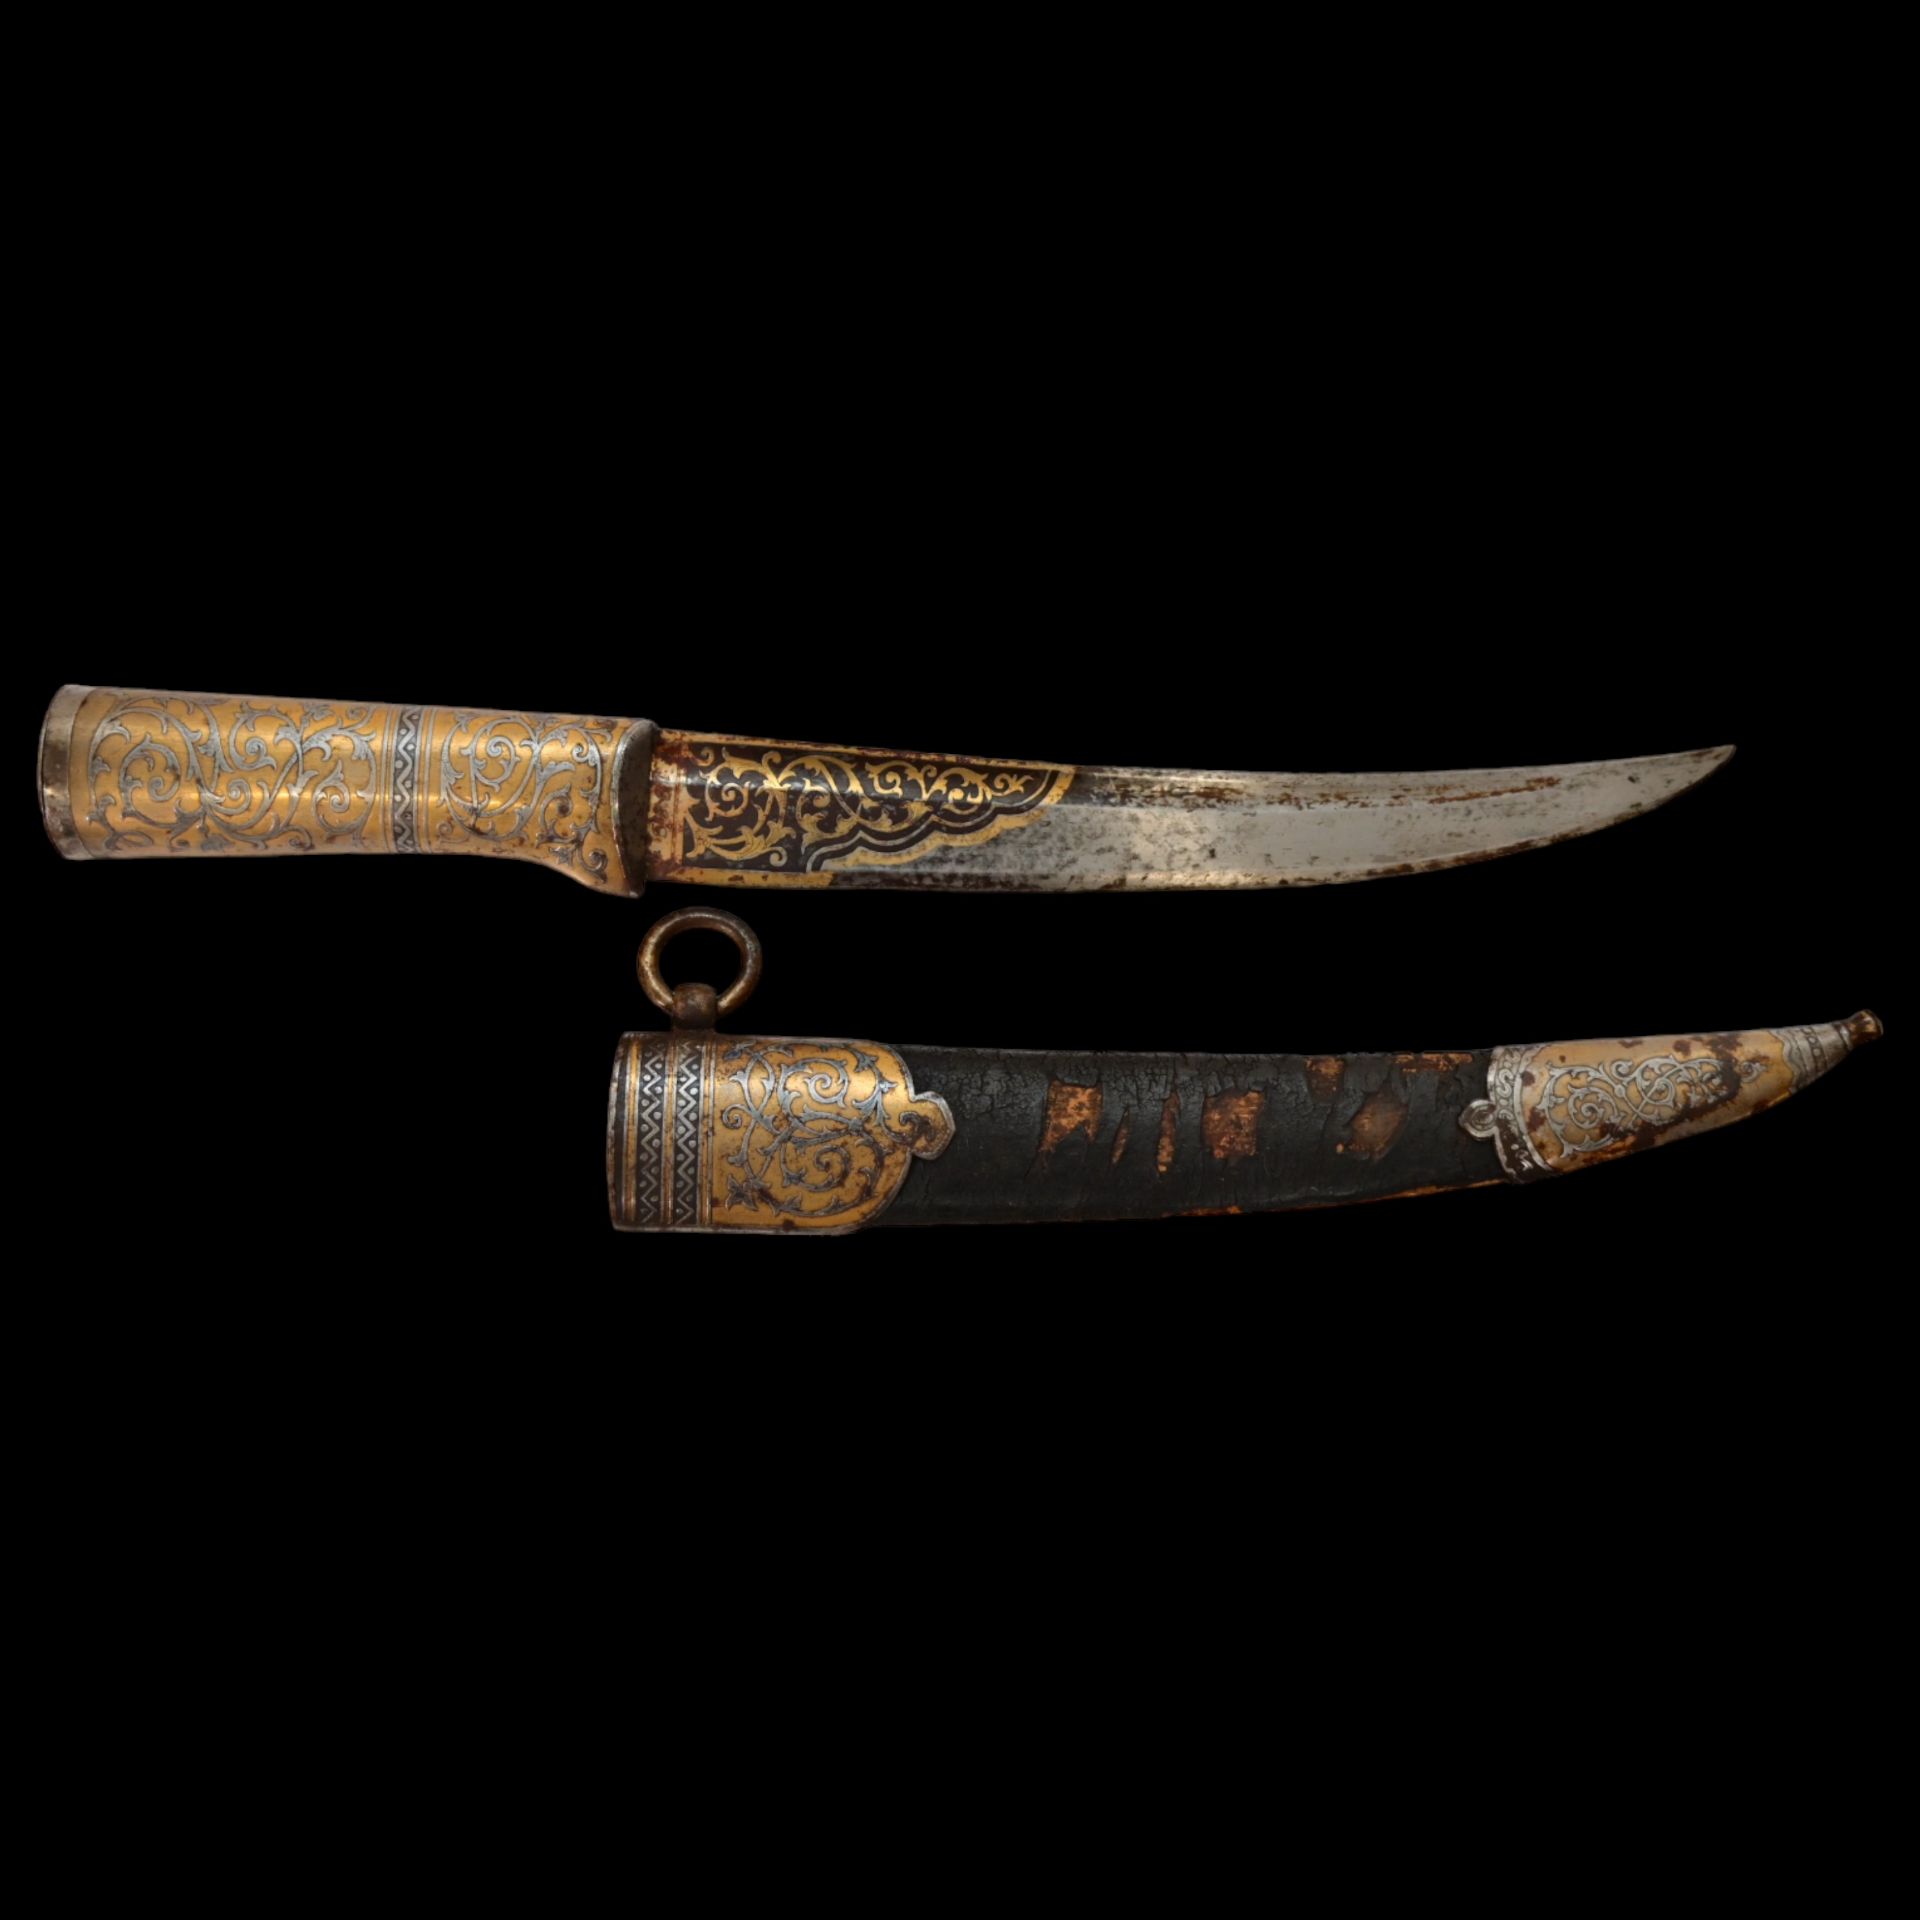 RARE HUNTING KNIFE, DECORATED WITH GOLD AND BLUE, RUSSIAN EMPIRE, ZLATOUST, 1889. - Image 3 of 26